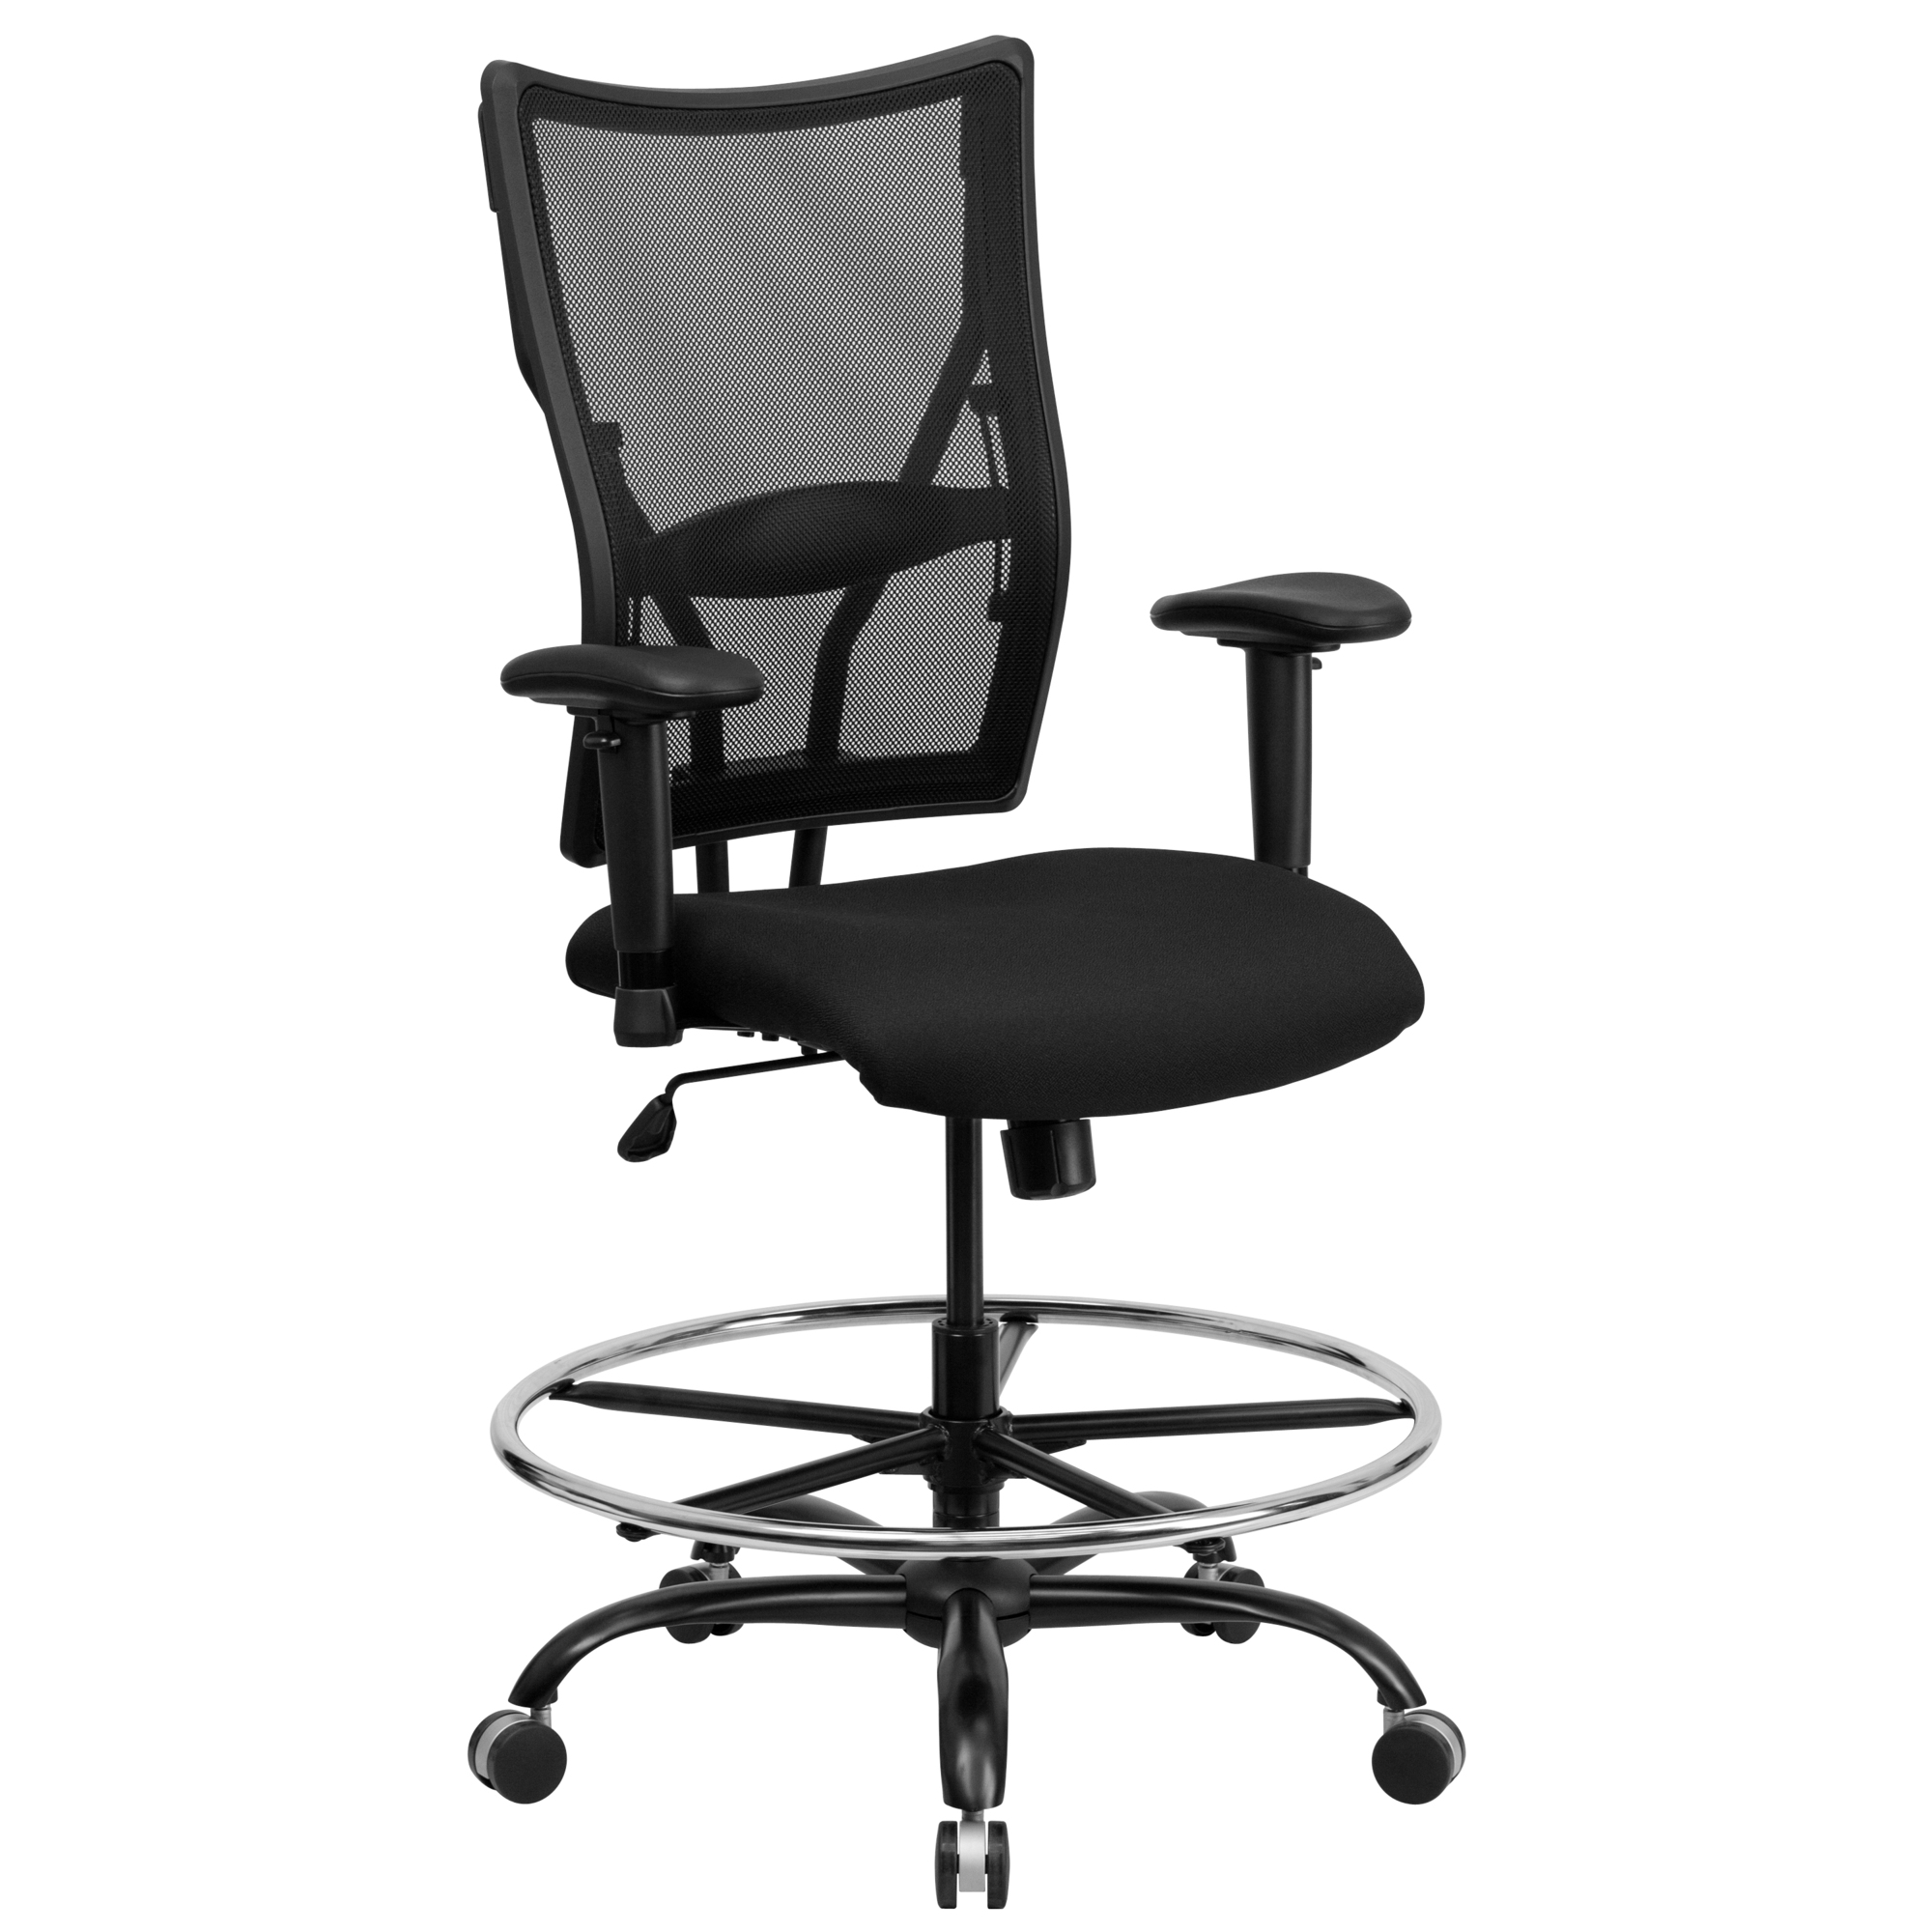 Flash Furniture, Big Tall 400 lb. Rated Black Mesh Drafting Chair, Primary Color Black, Included (qty.) 1, Model WL5029SYGAD